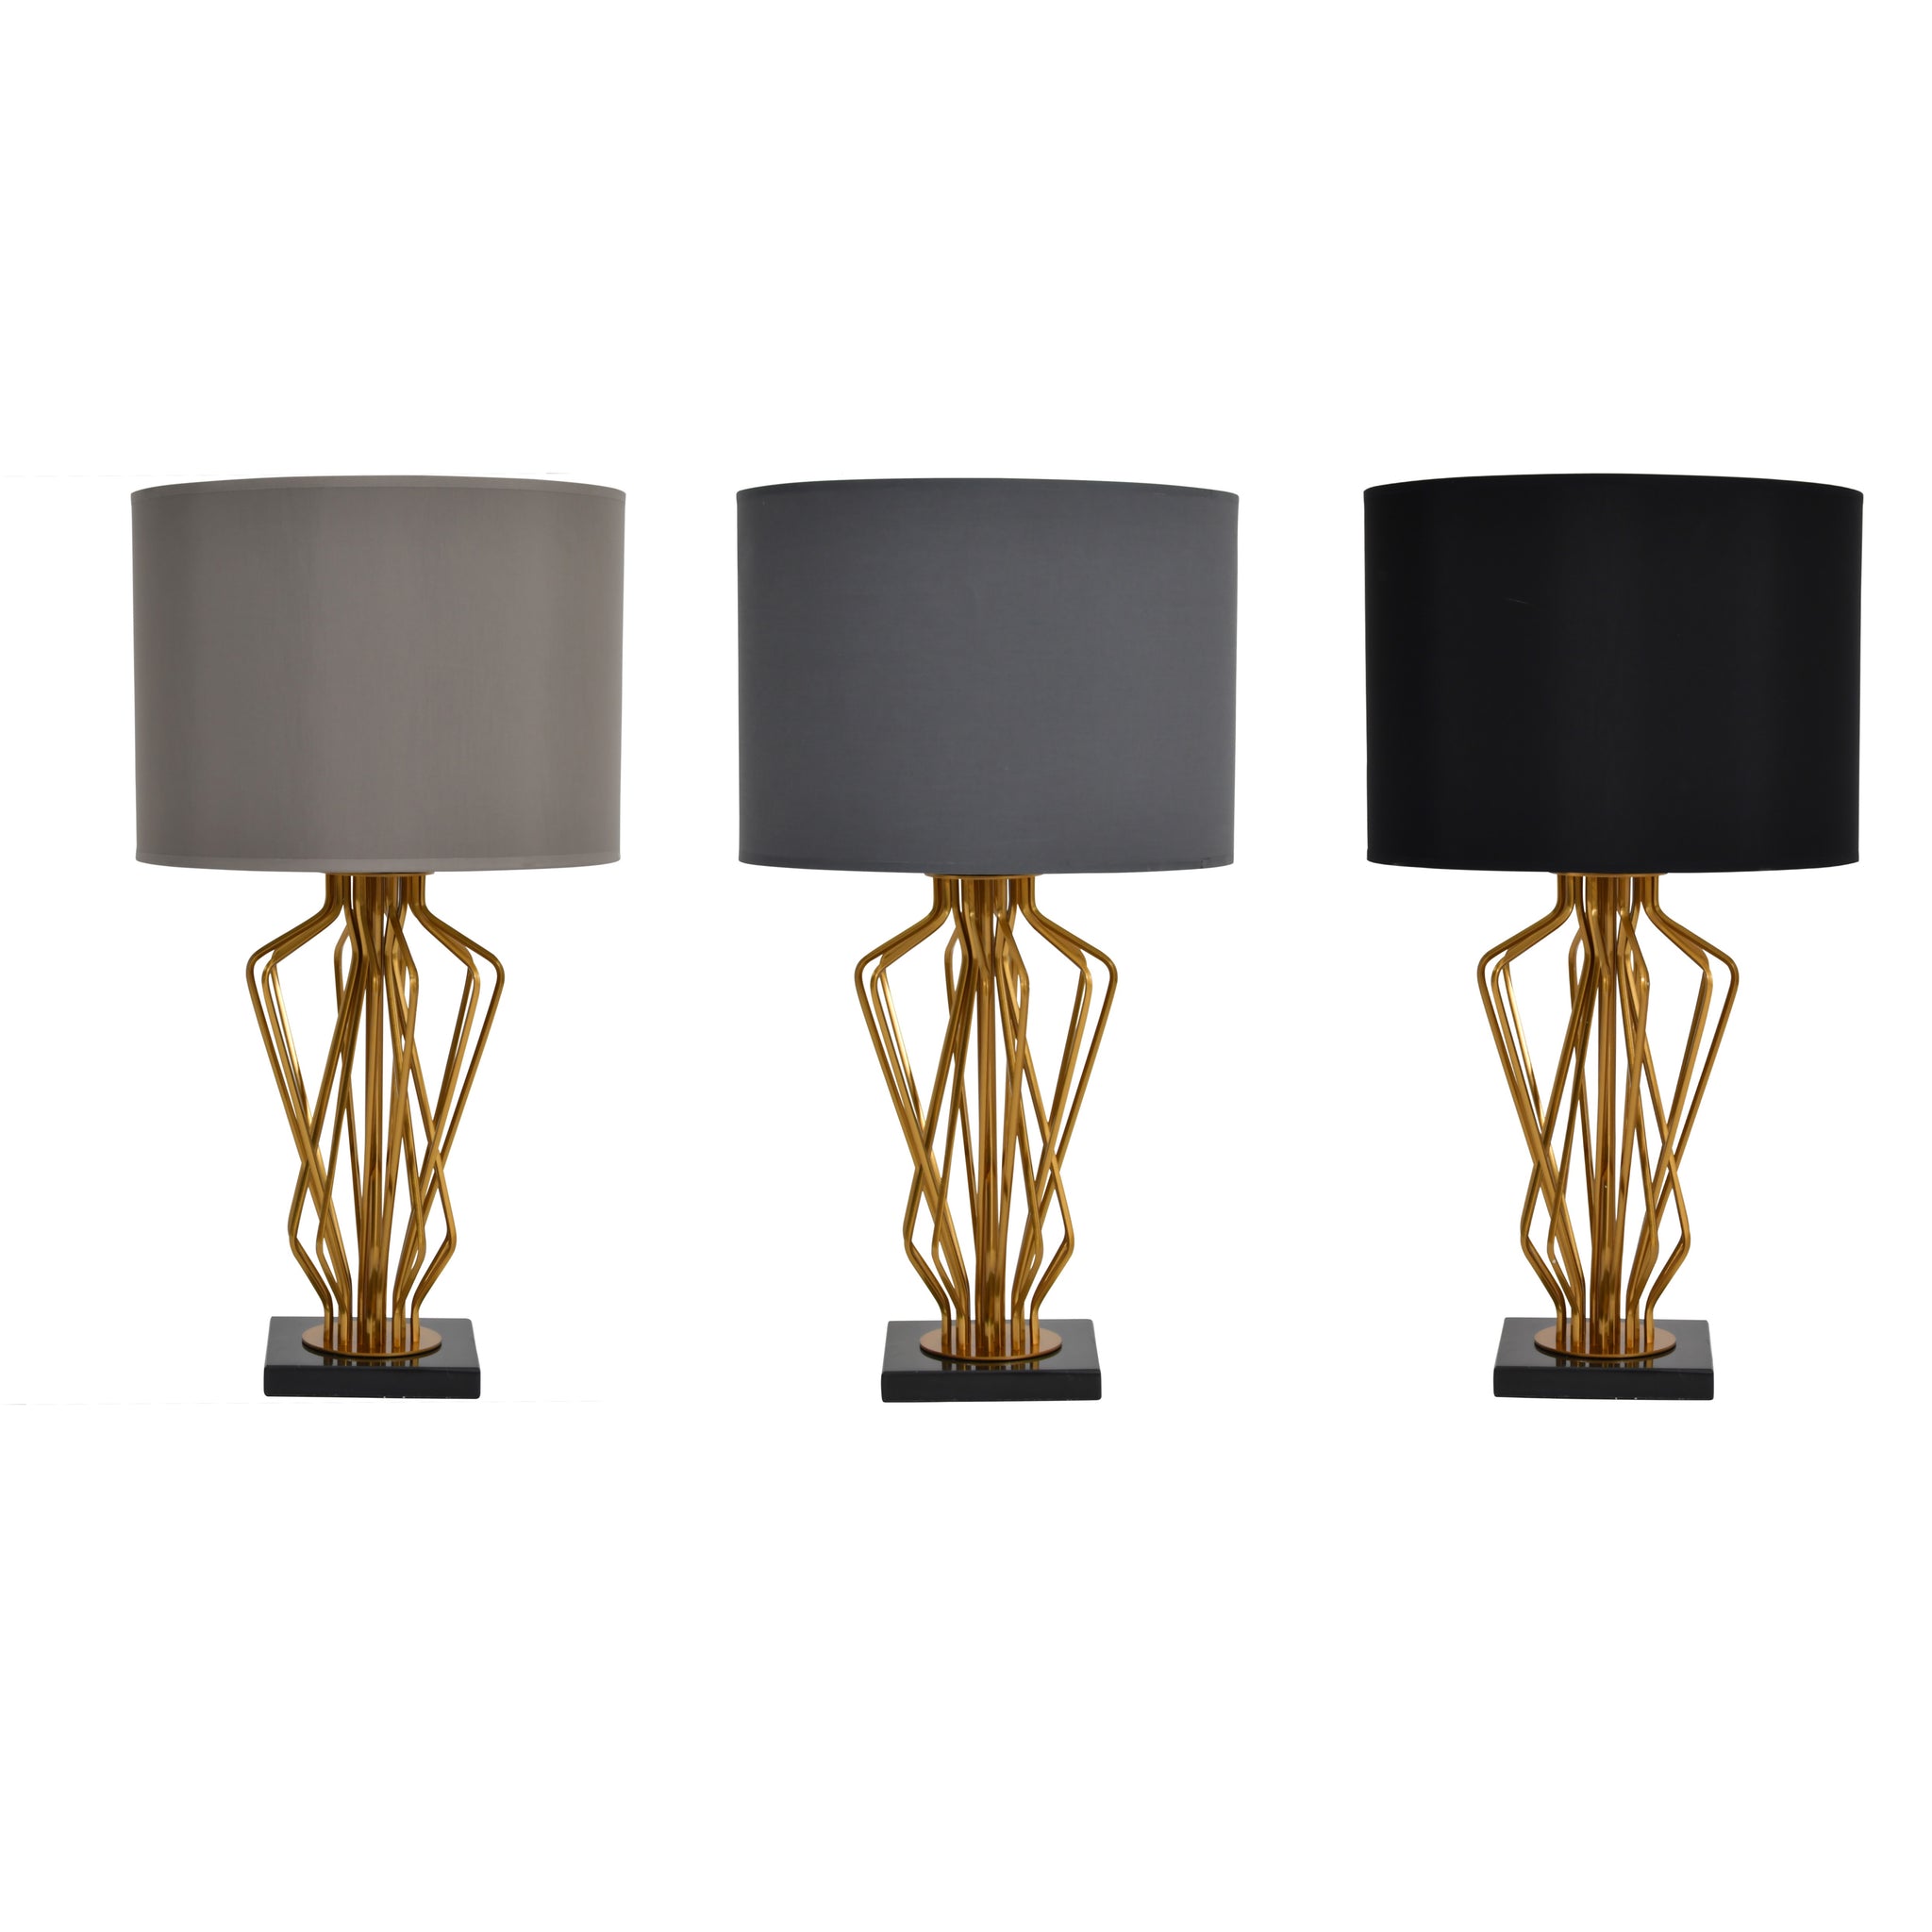 Brass Spindle Lamp (Base Only) suits 16 inch shade E27 60W